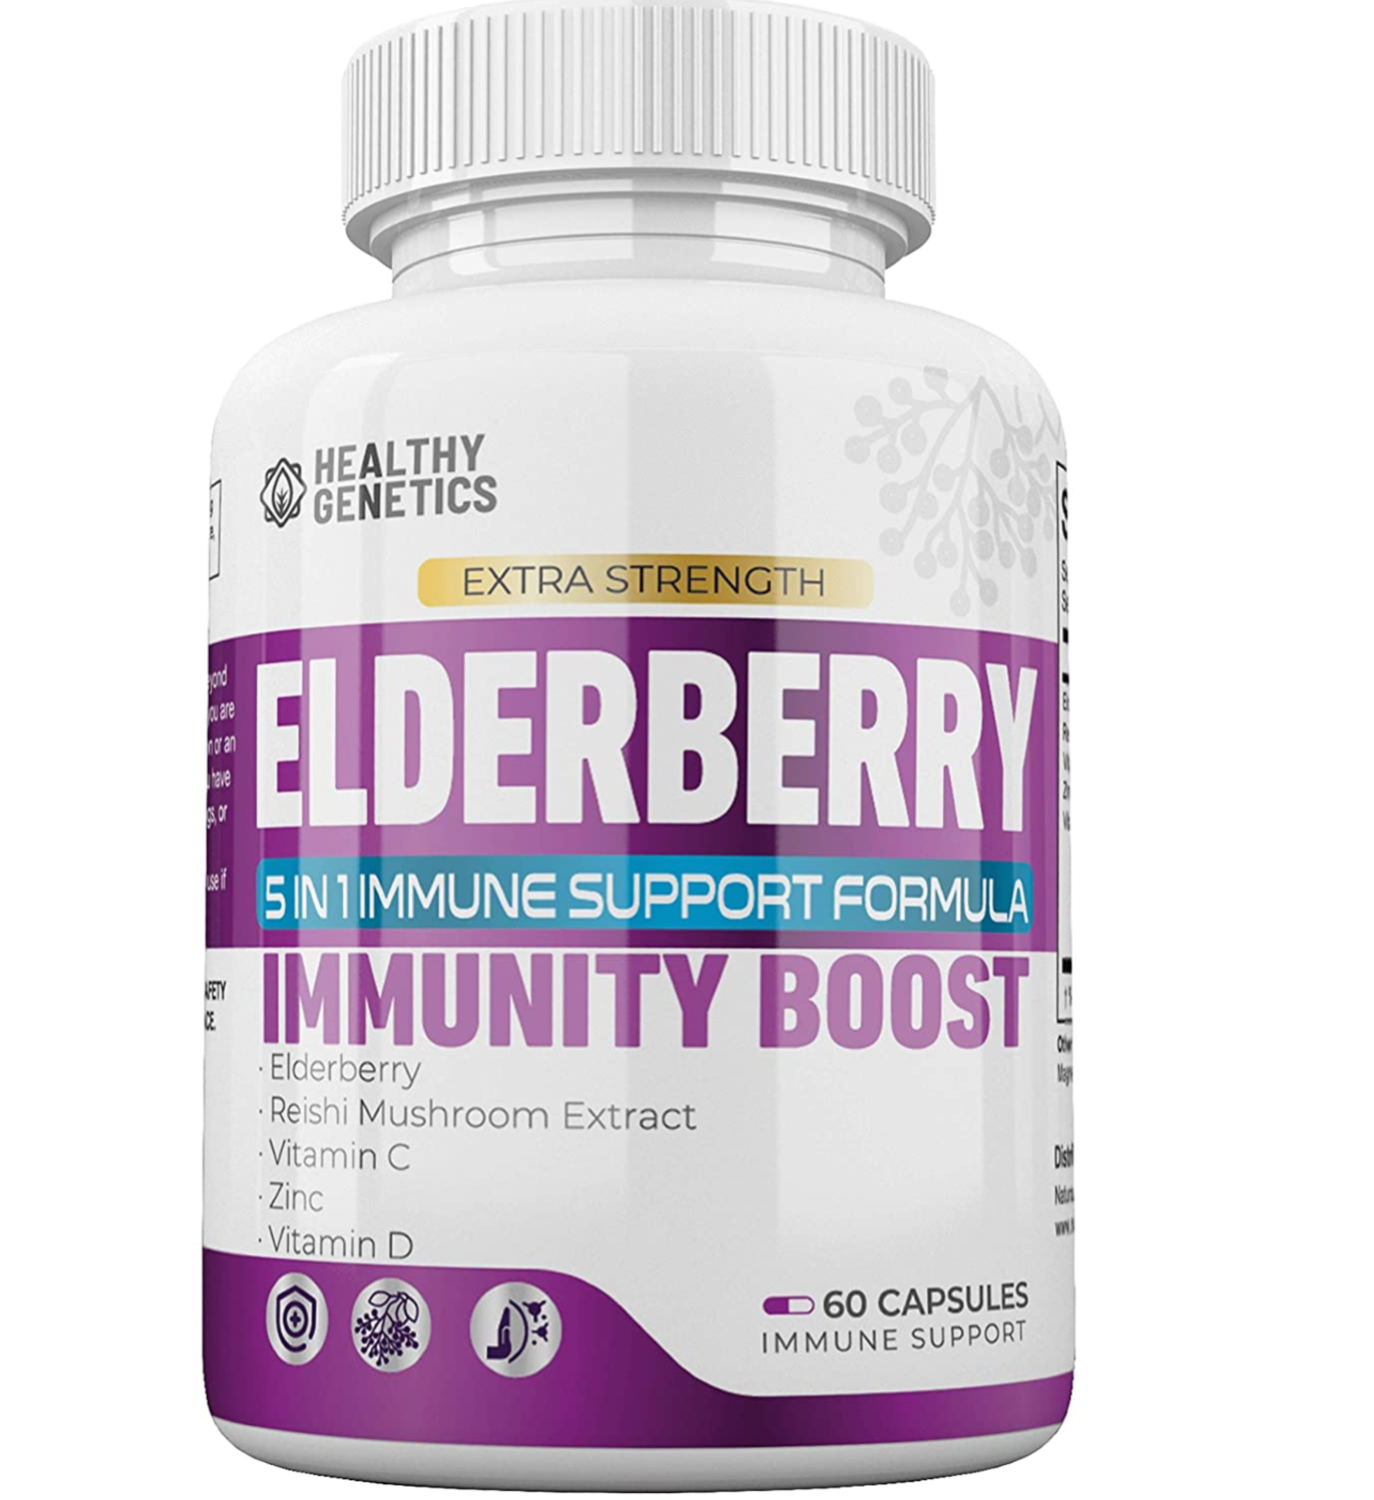 Elderberry 5-in-1 Immune Support Formula - Extra Strength Immunity Supplements - Reishi Extract, Vitamins C and D, Zinc Blend - Antioxidant, Energy Booster, Heart Health - 60 Capsules